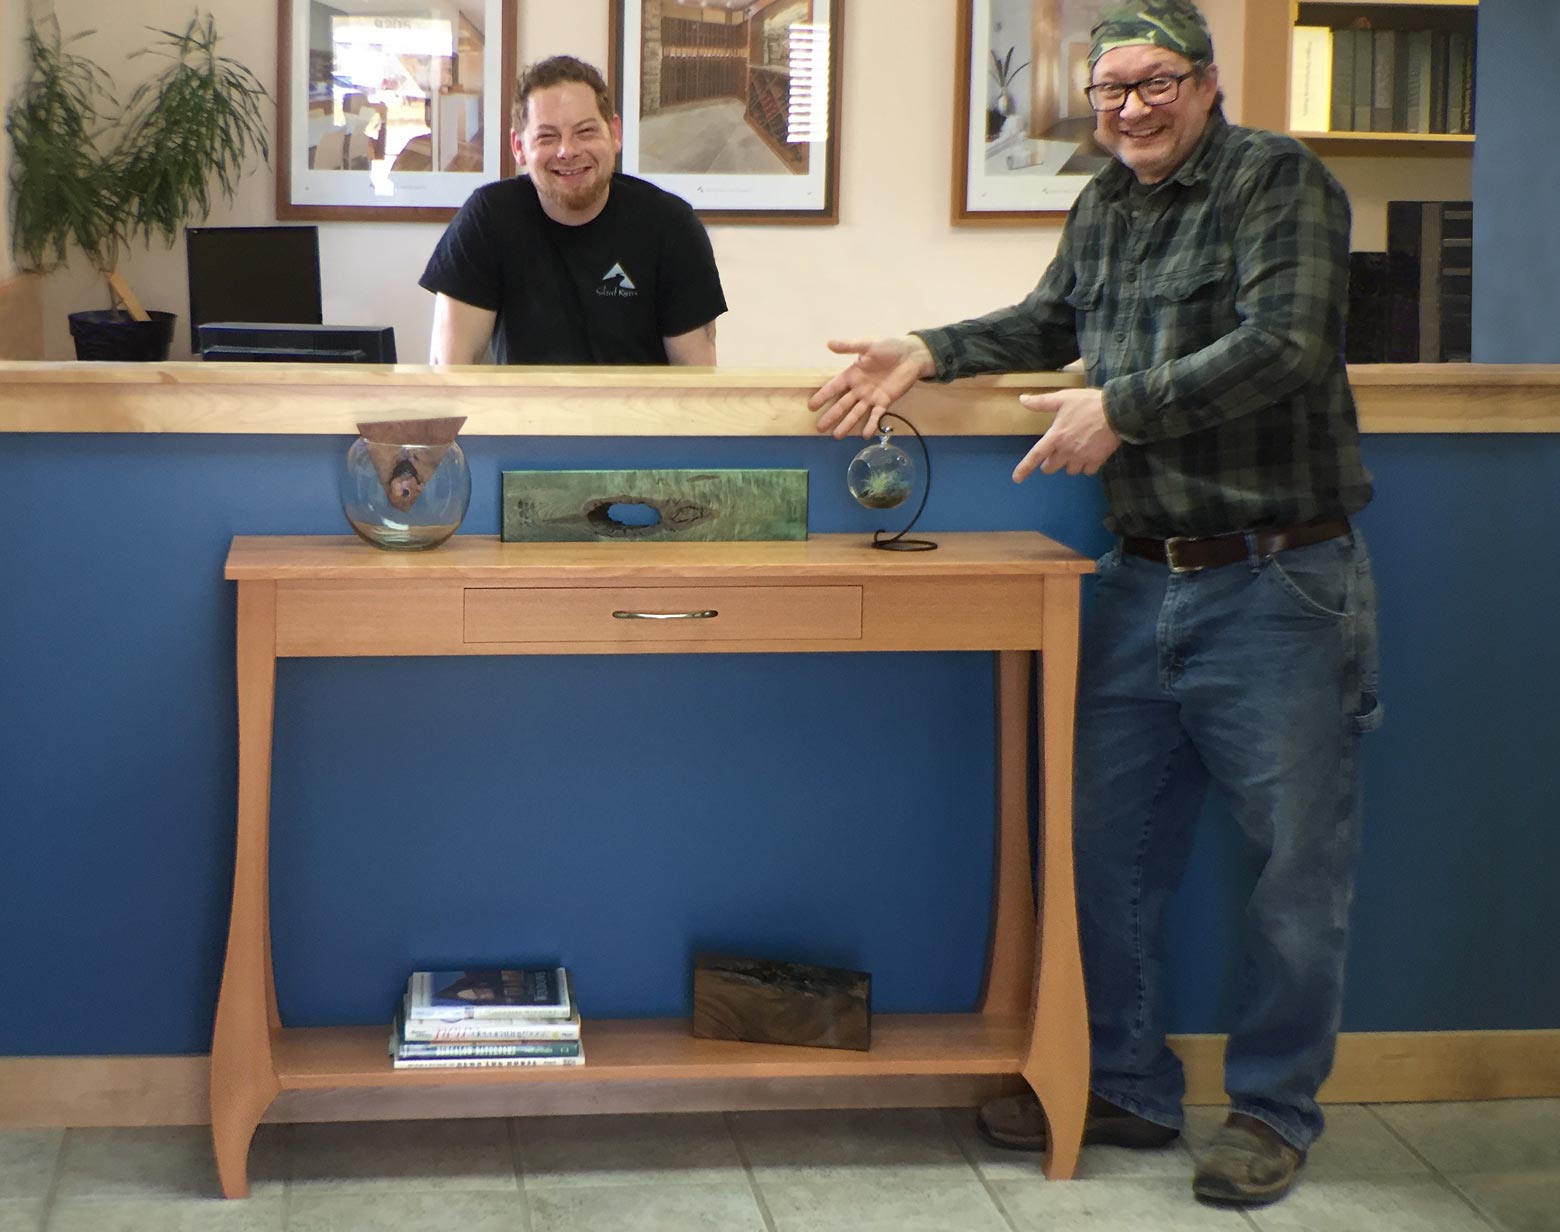 Alex Schlepphorst and Tom Bloxham from the Silent Rivers Woodshop designed and built this table together out of leftover wood.